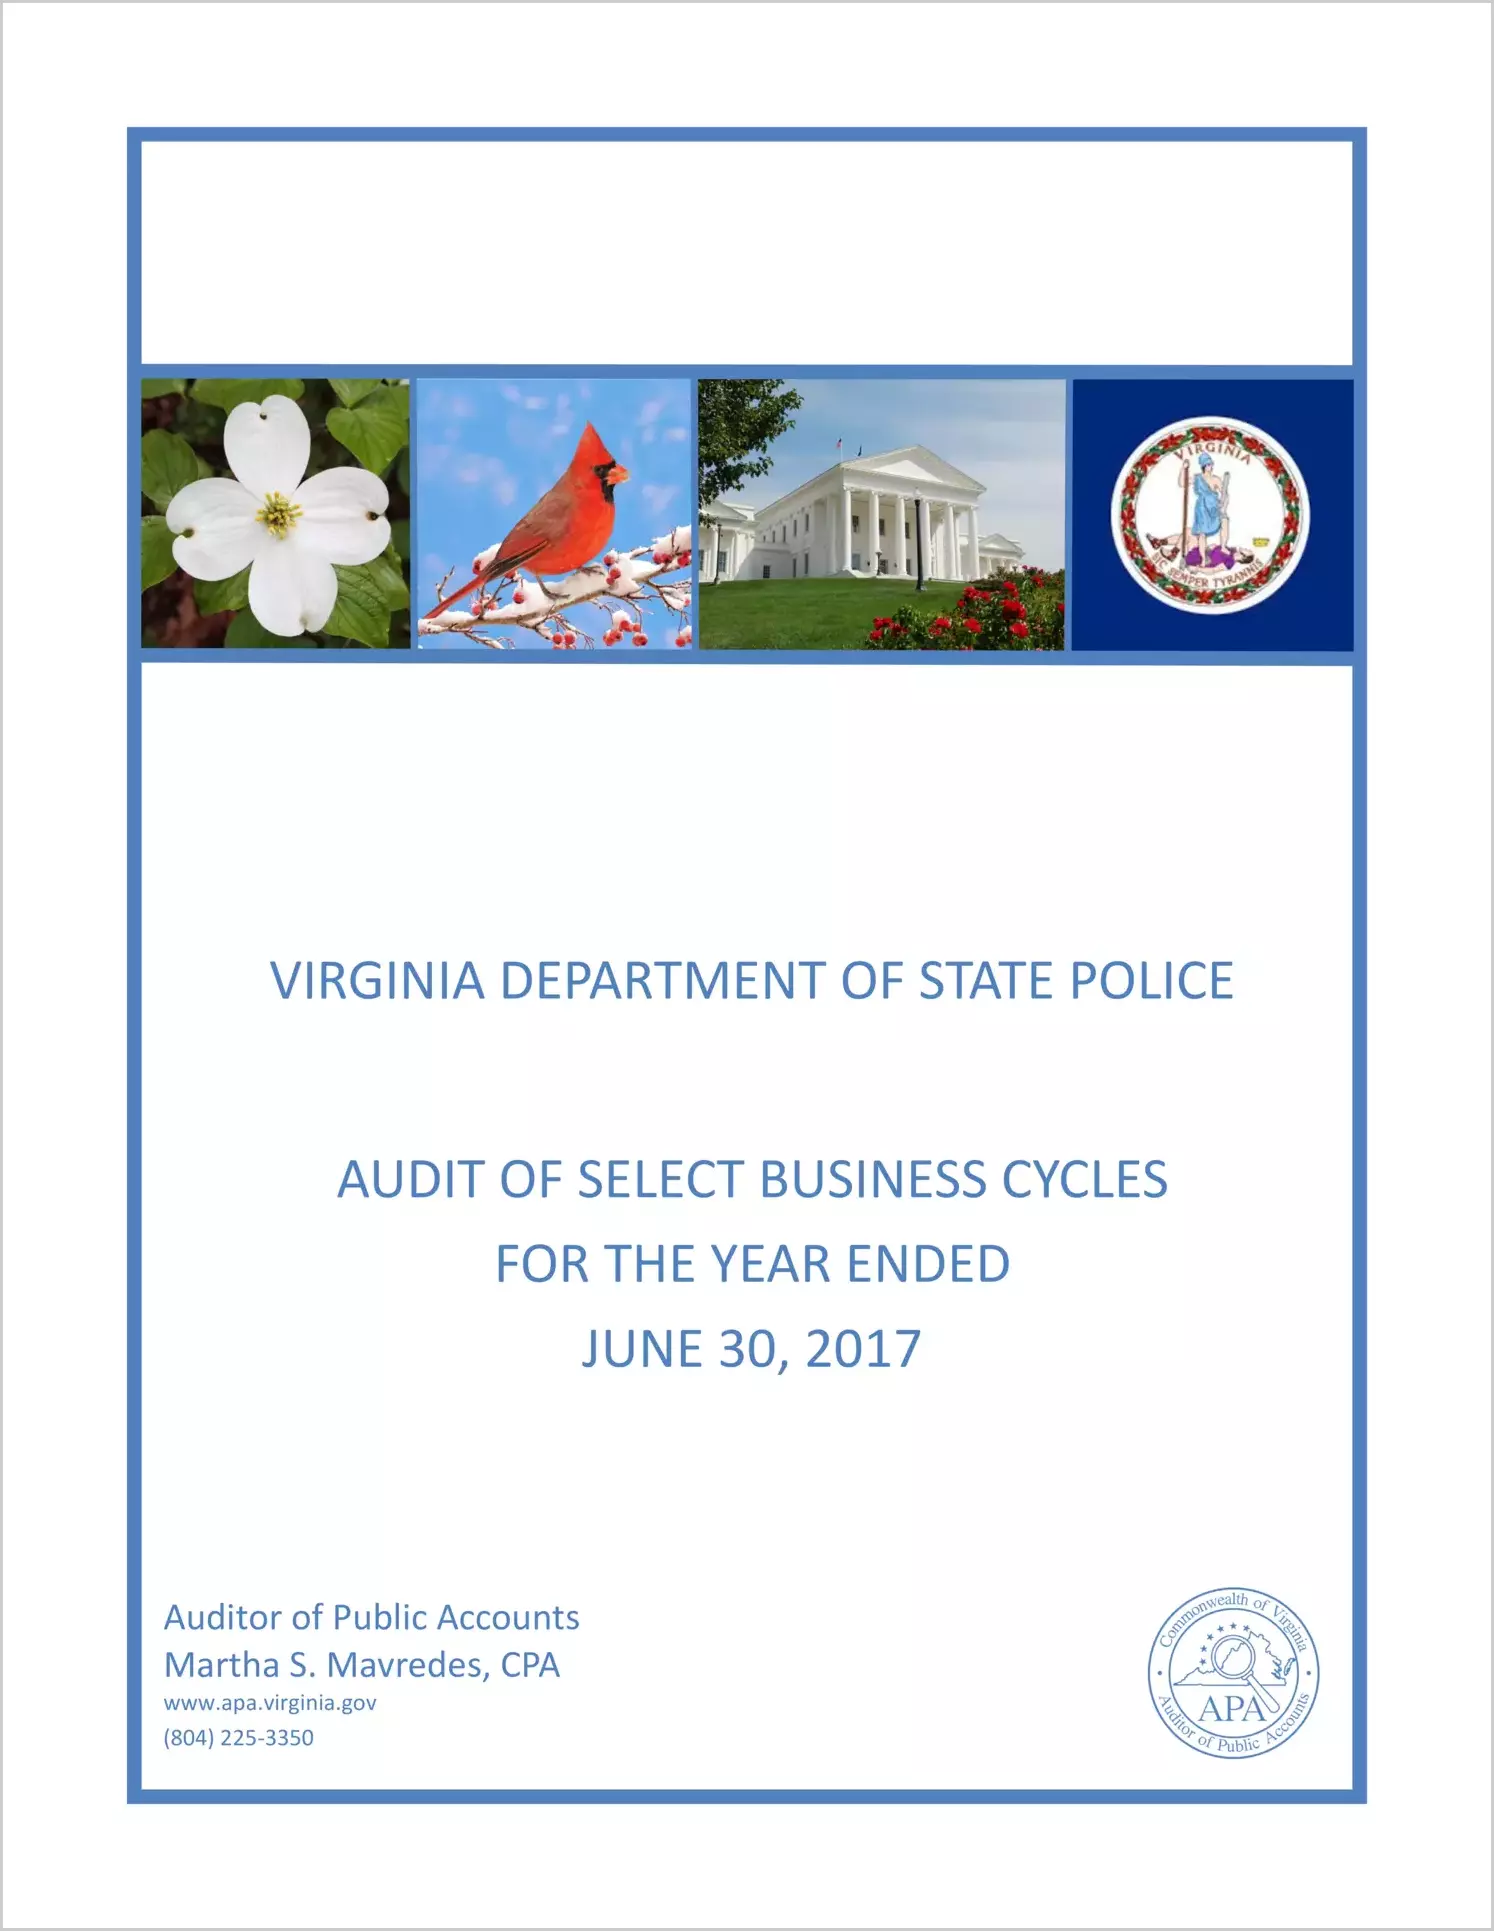 Virginia Department of State Police Audit of Selected Business Cycles for the year ended June 30, 2017